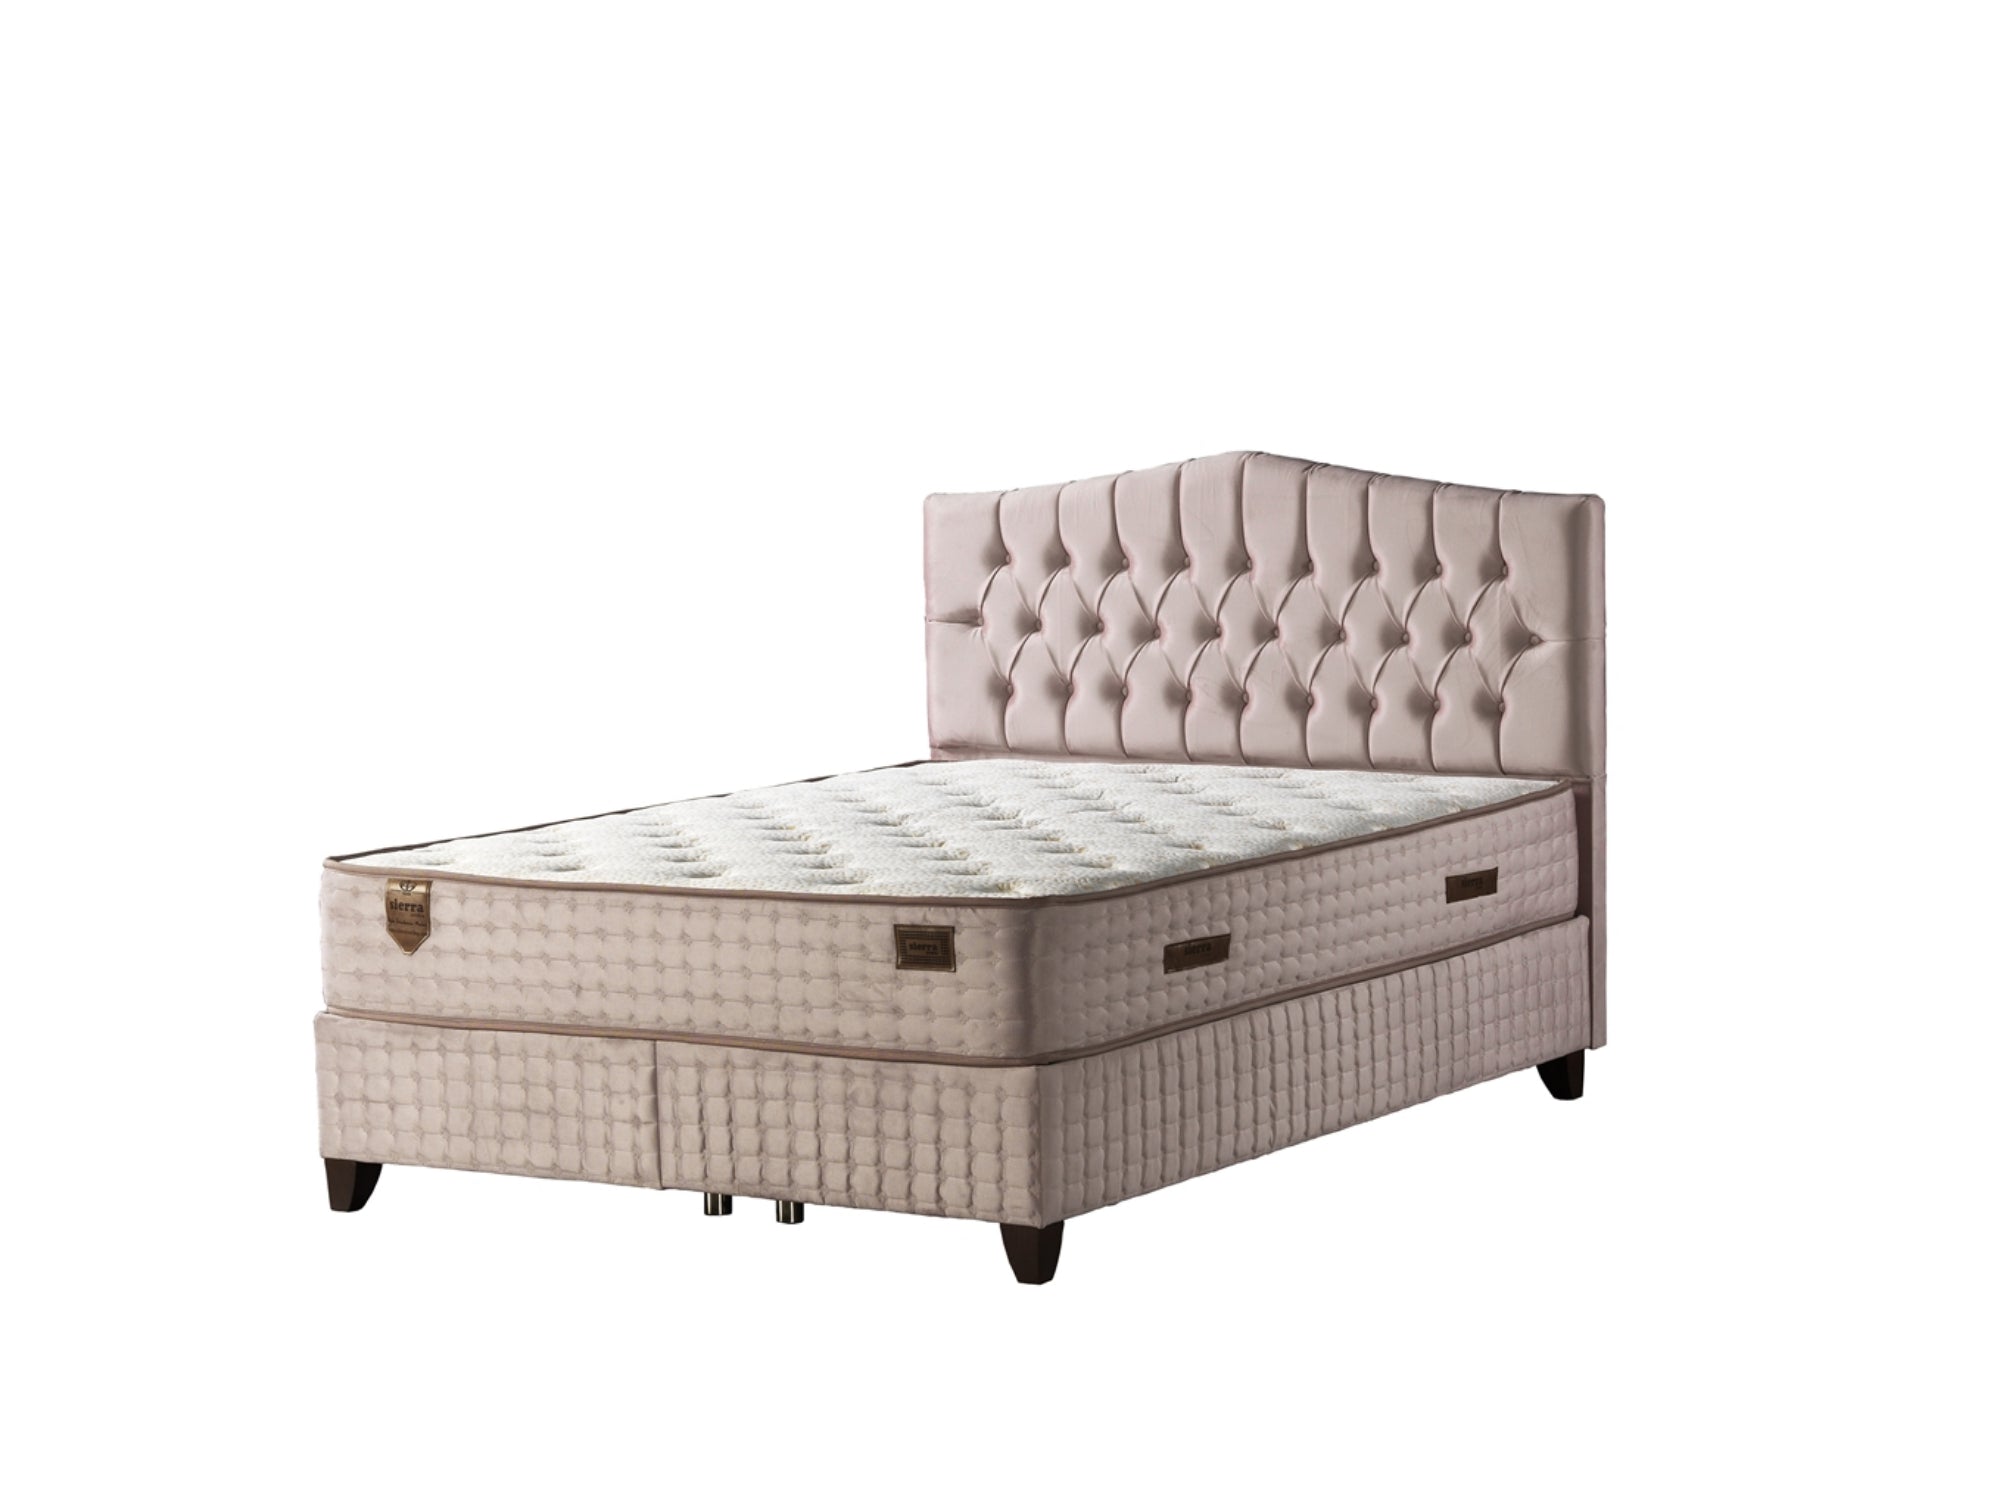 Milano Storage Bed With Headboard Brown